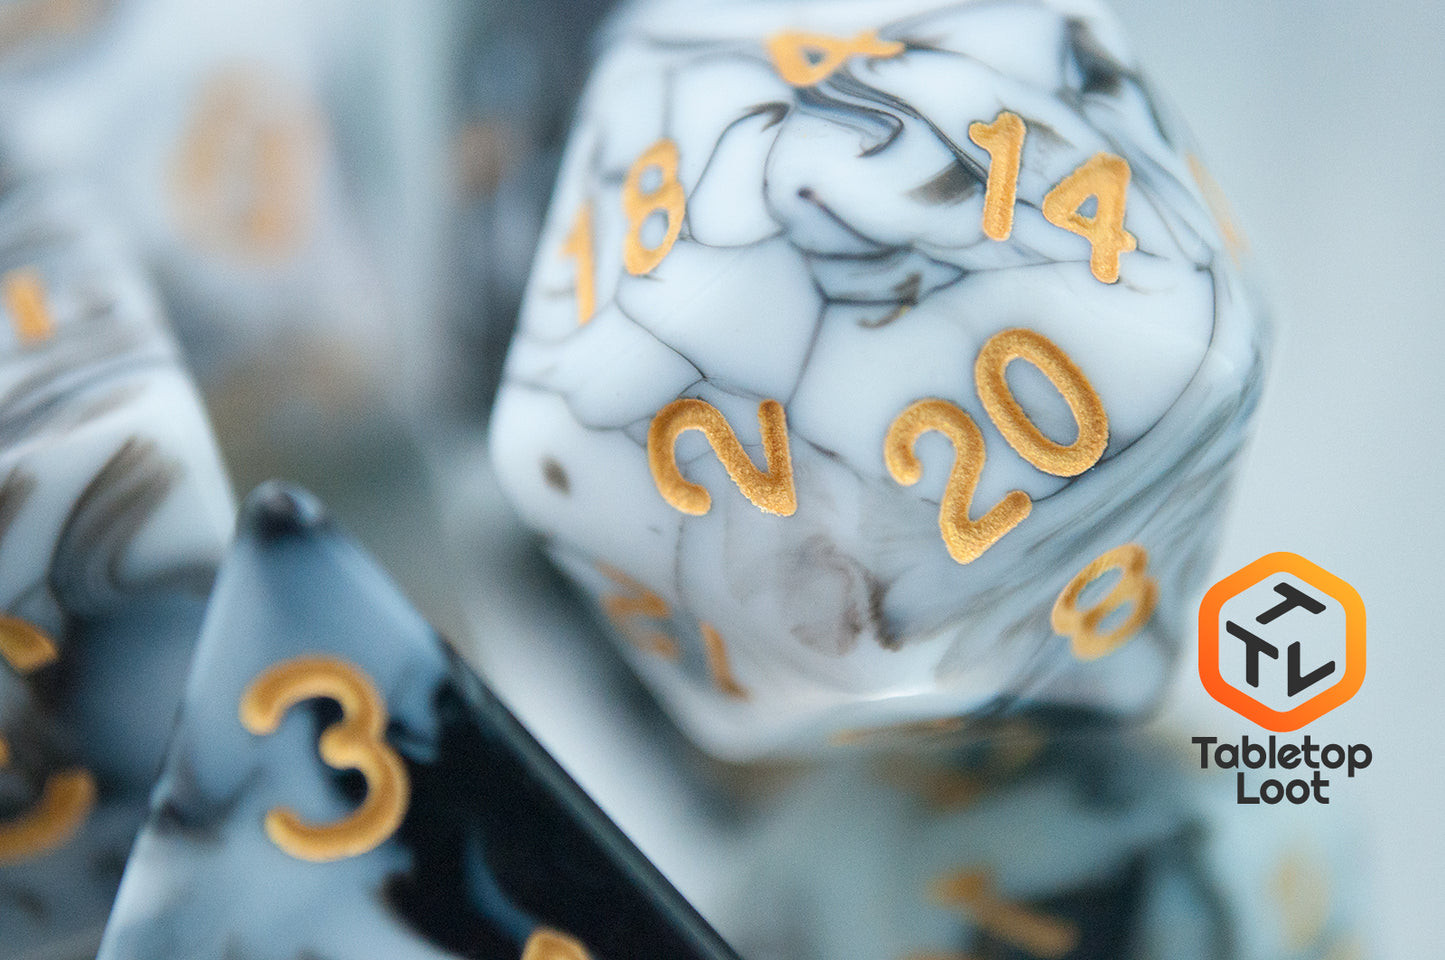 A close up of the D20 from the Rolling Thunder 7 piece dice set from Tabletop Loot with swirls of white, grey, and black resin and gold numbering.